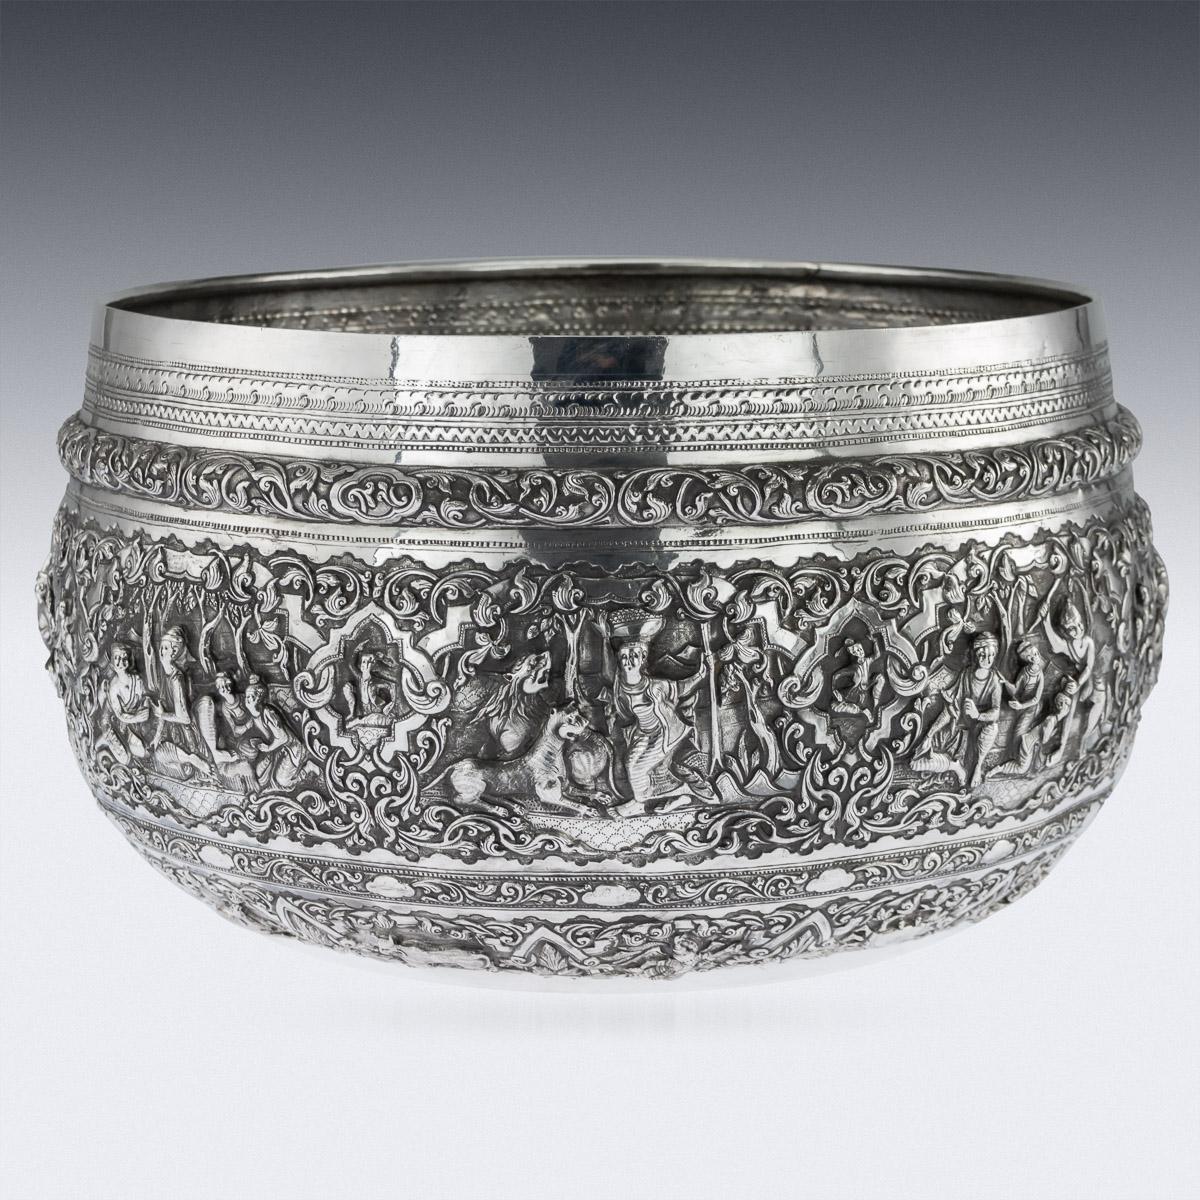 Antique early 20th century monumental Burmese, (Myanmar) solid silver Thabeik bowl, repousse' decorated in high relief with detailed panels depicting different traditional scenes from the Burmese mythology, showing very detailed figures set against